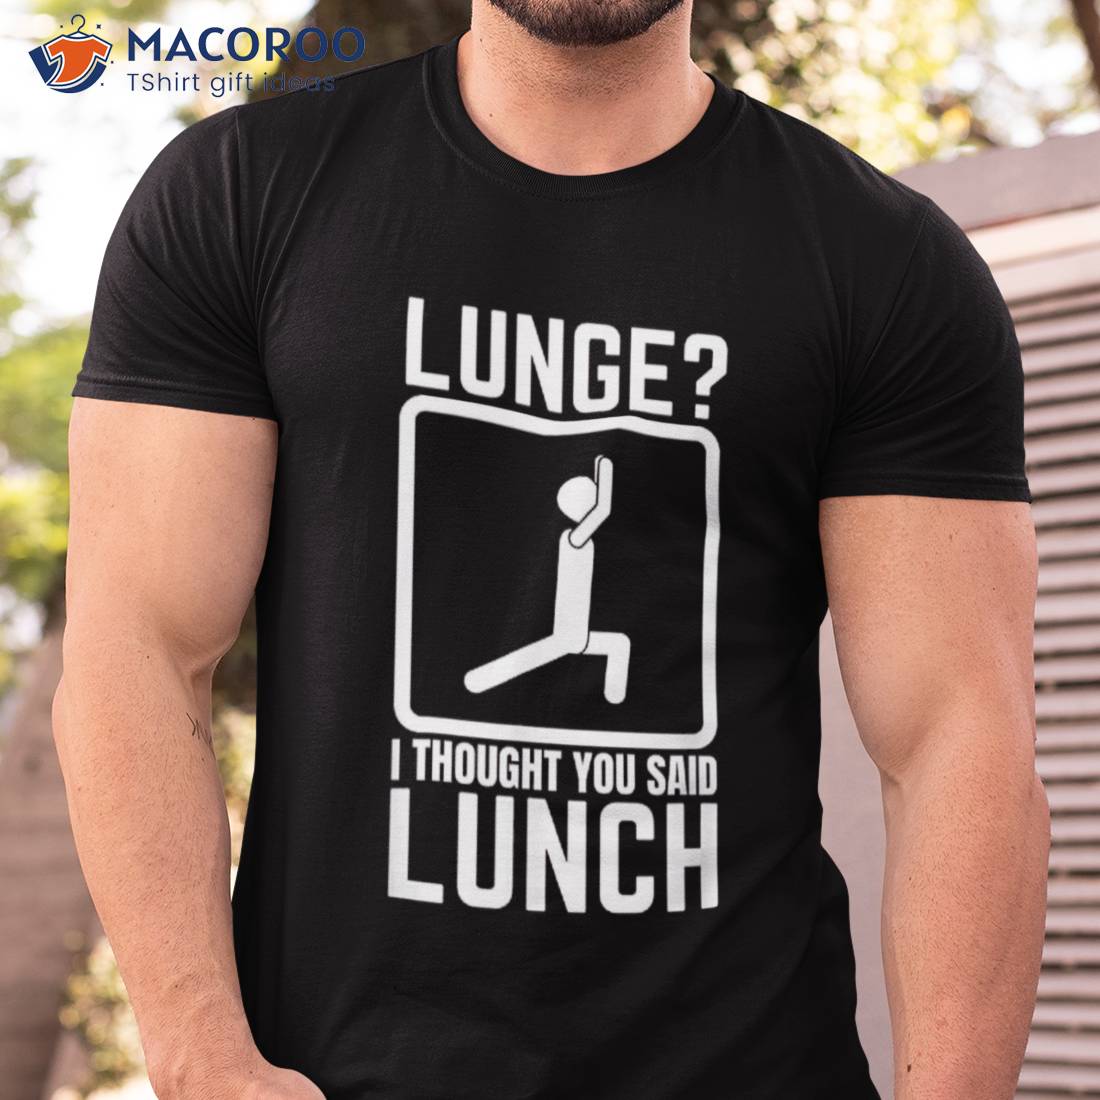 Funny Gym Shirt, Workout Top, Lunge Lunch Stick Figure Shirt